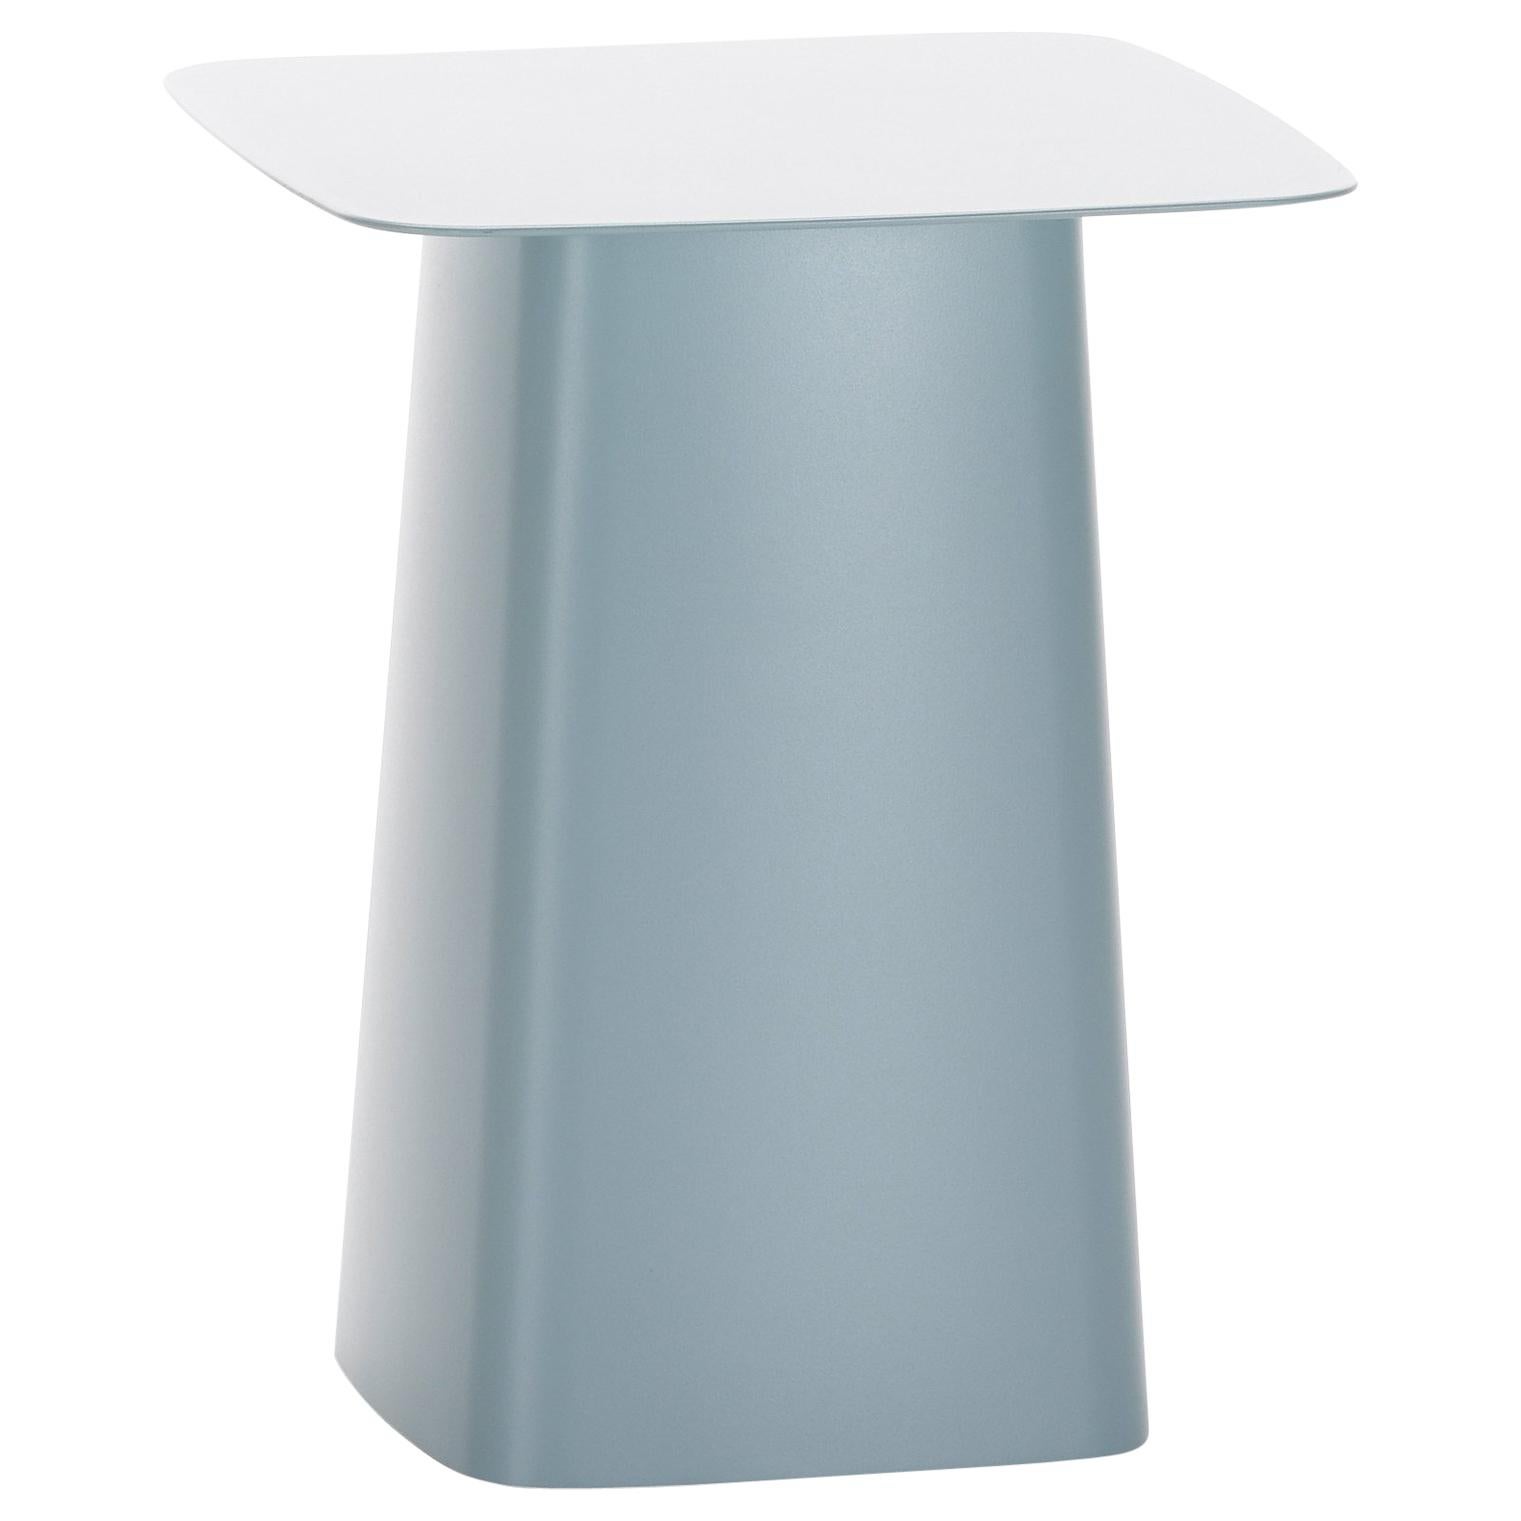 Vitra Small Metal Side Table for Outdoor in Ice Grey by Ronan & Erwan Bouroullec im Angebot